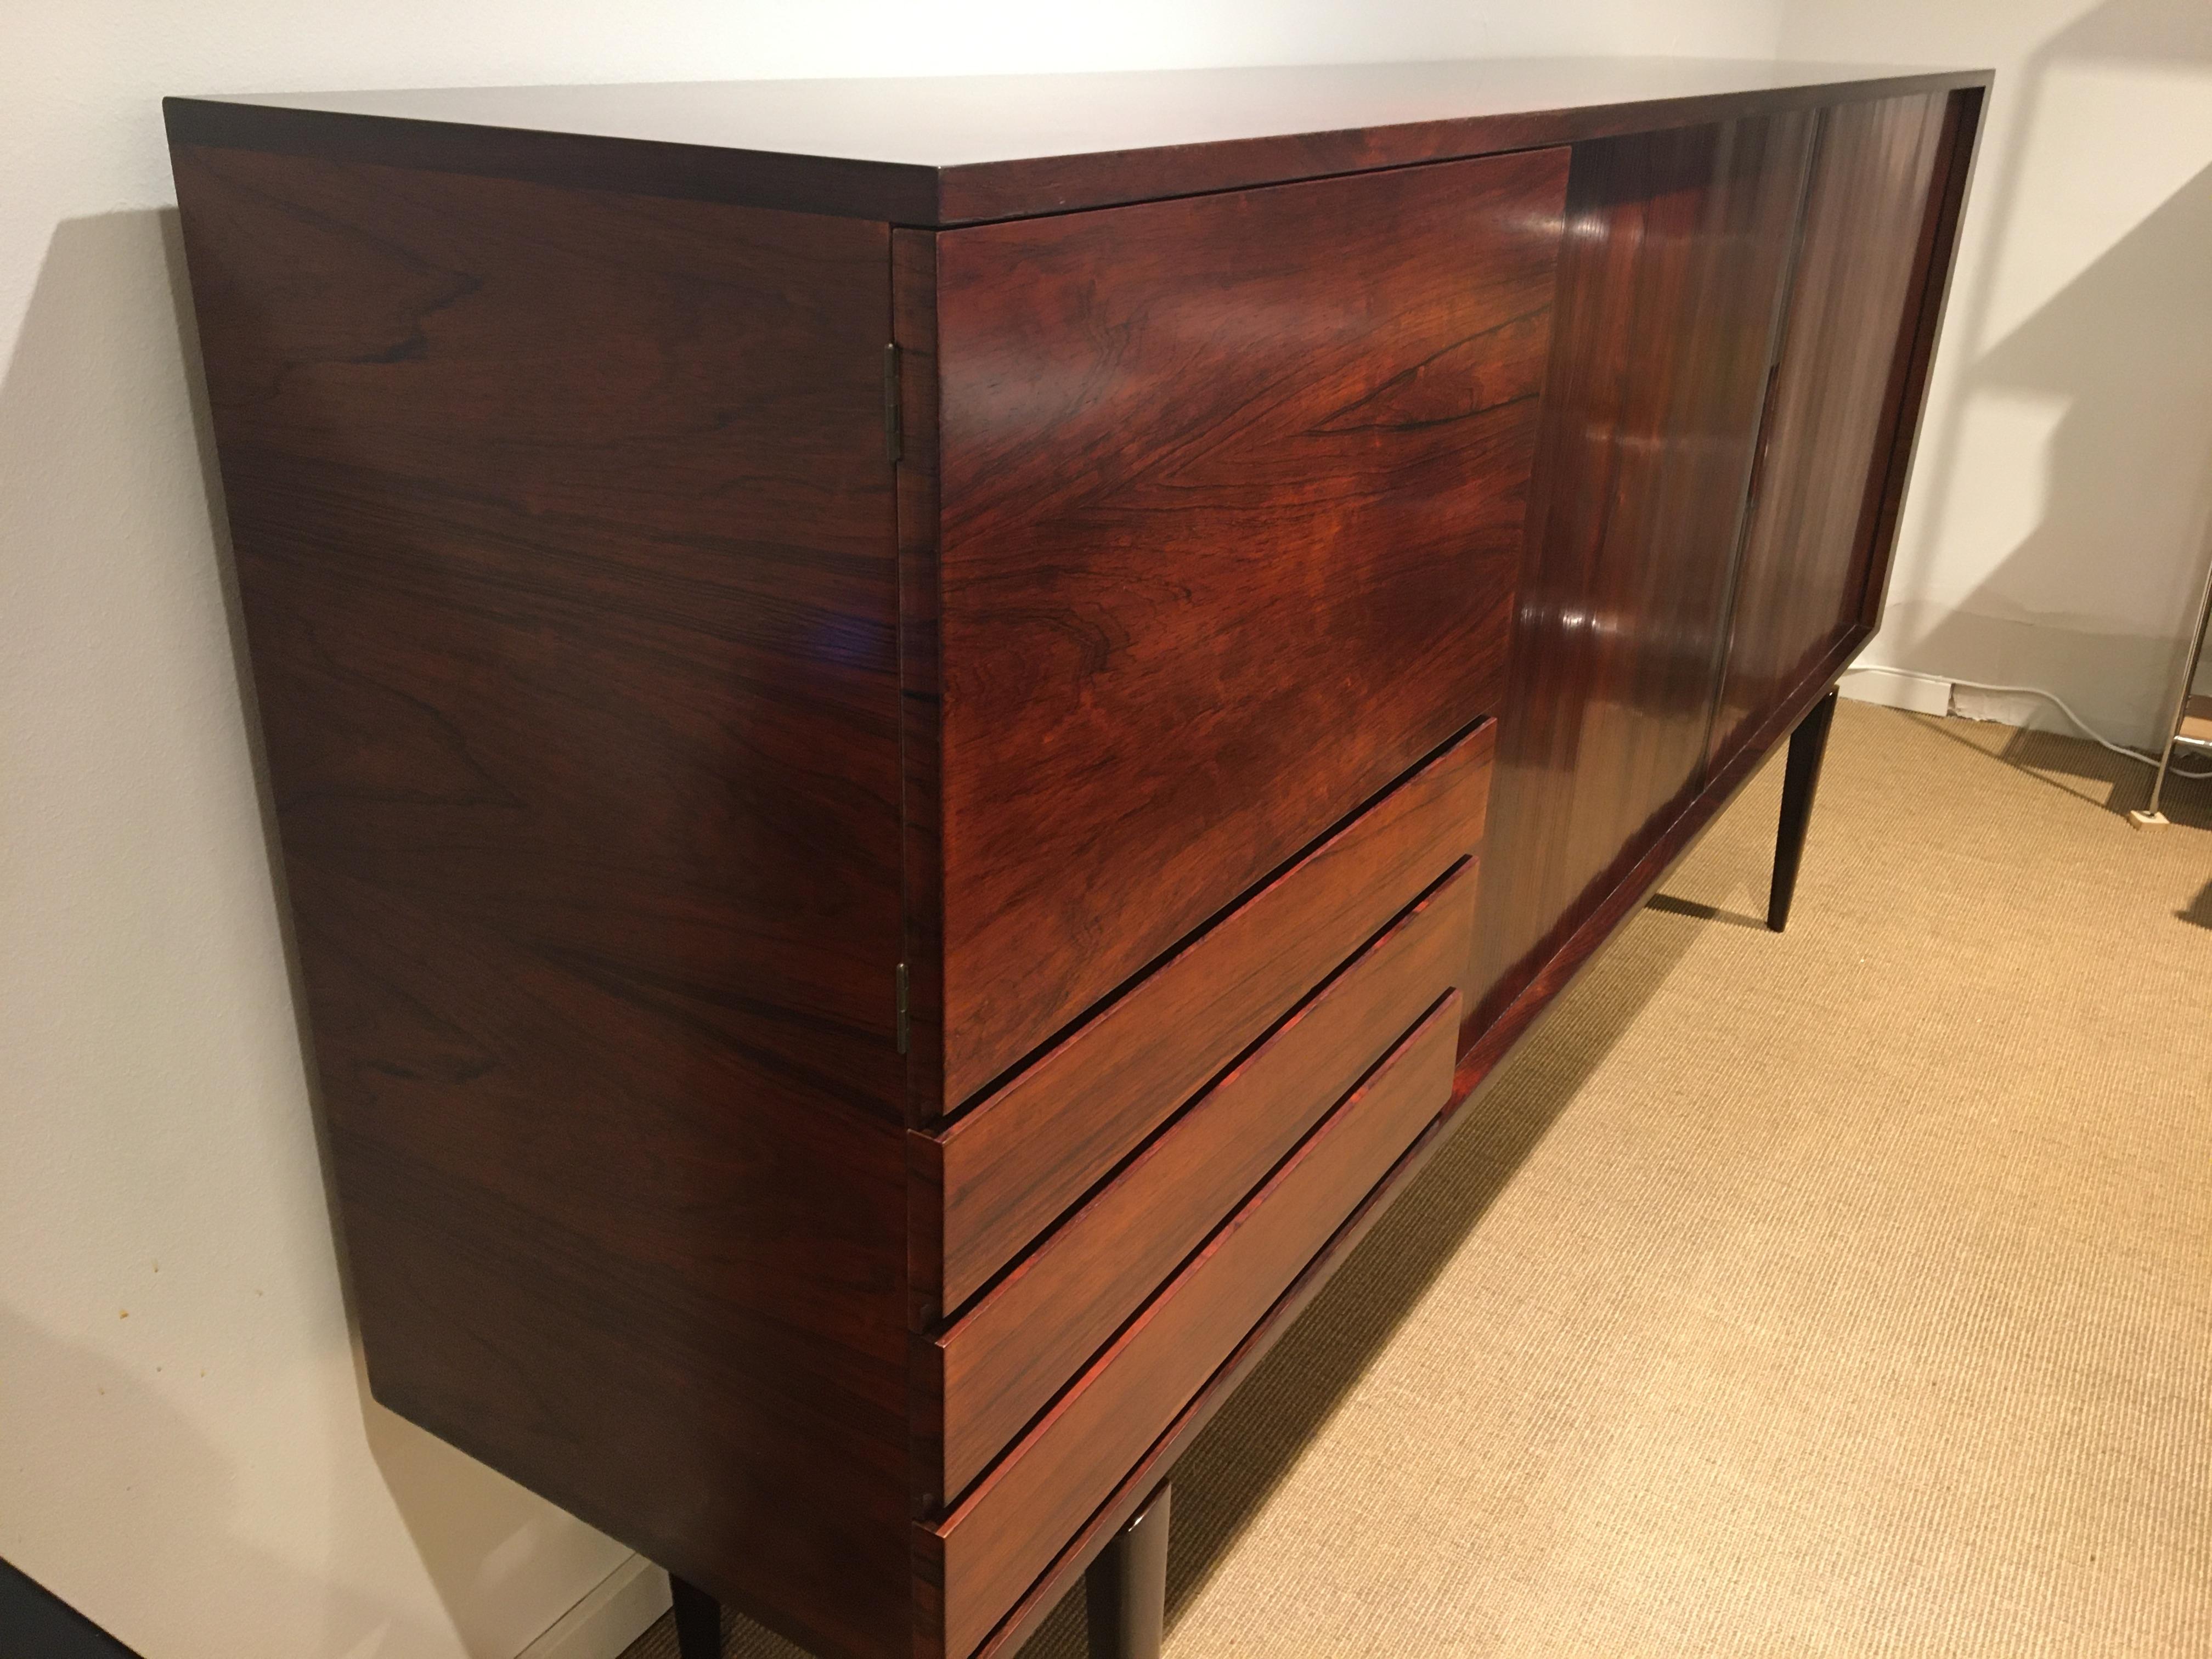 Rosewood High Sideboard newly restored. Design: H.W. Klein from Bramin Furniture.
The sideboard is made with hover.
Front with double blinds and milled handles, 1 large door and 3 drawers.
Inside the shutter doors are shelves in Oak.
Behind the door